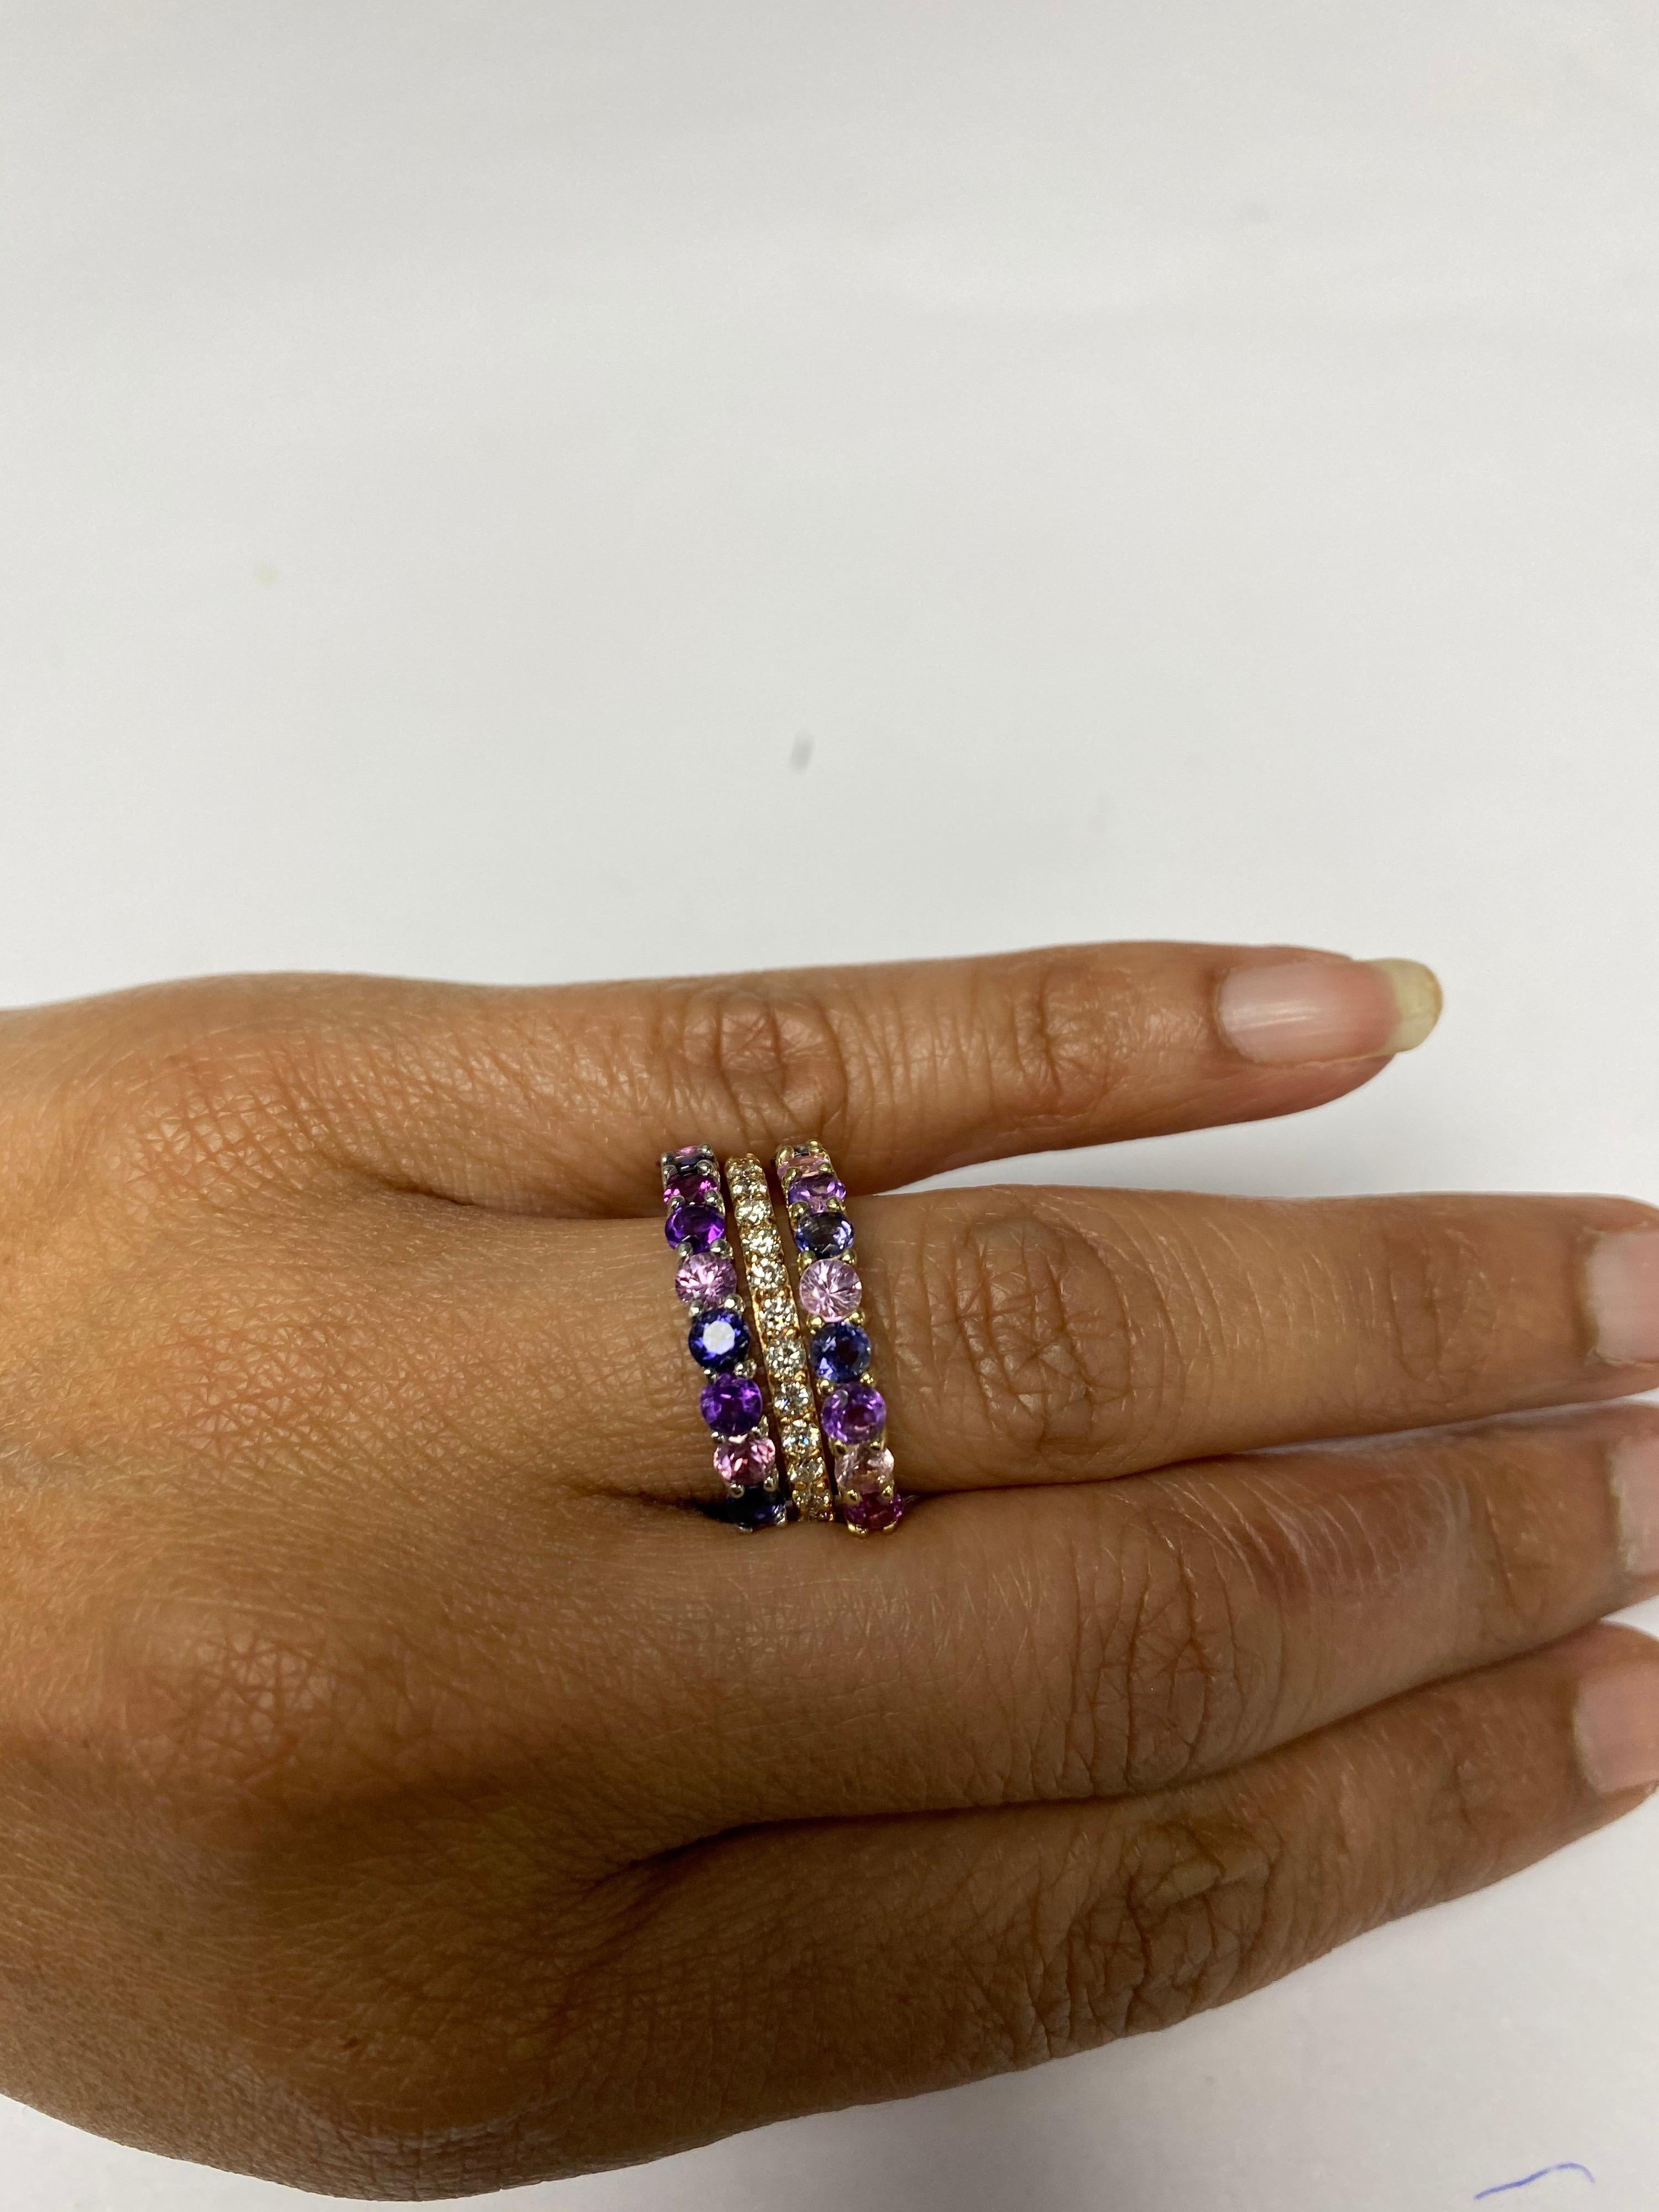 There are 11 Multicolored Genuine Gemstones in this band that weighs 1.41 Carats. The band has a mixture of Pink Sapphires, Amethysts and Purple Garnets!
It is perfect for everyday wear and looks amazing stacked or alone. They are versatile and can